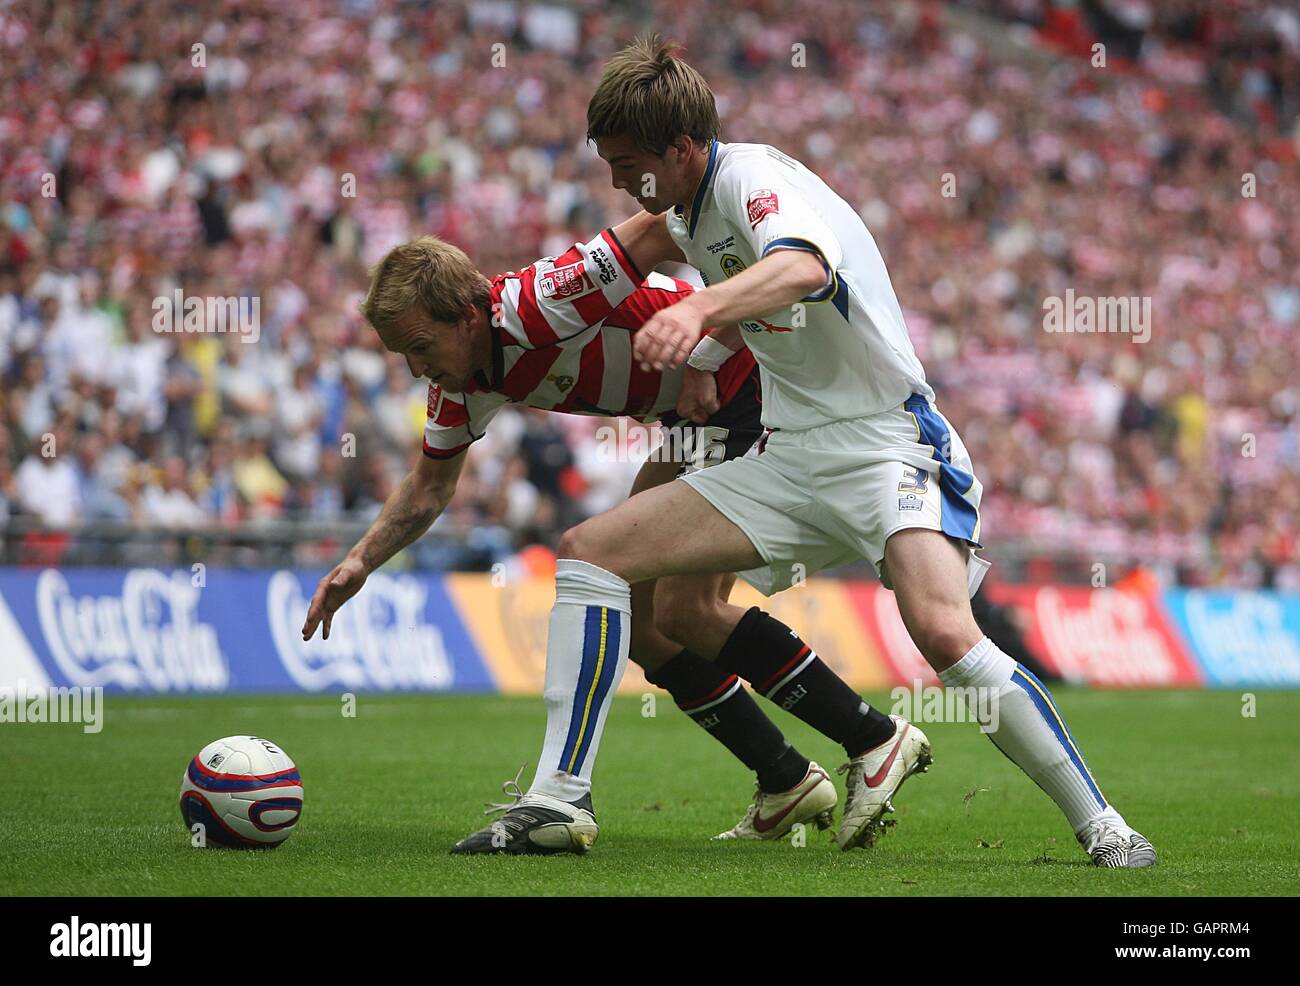 Soccer - Coca-Cola Football League One - Play Off - Final - Doncaster Rovers v Leeds United - Wembley Stadium. Leeds United's Paul Huntington (right) and Doncaster Rovers' James Coppinger battle for the ball. Stock Photo